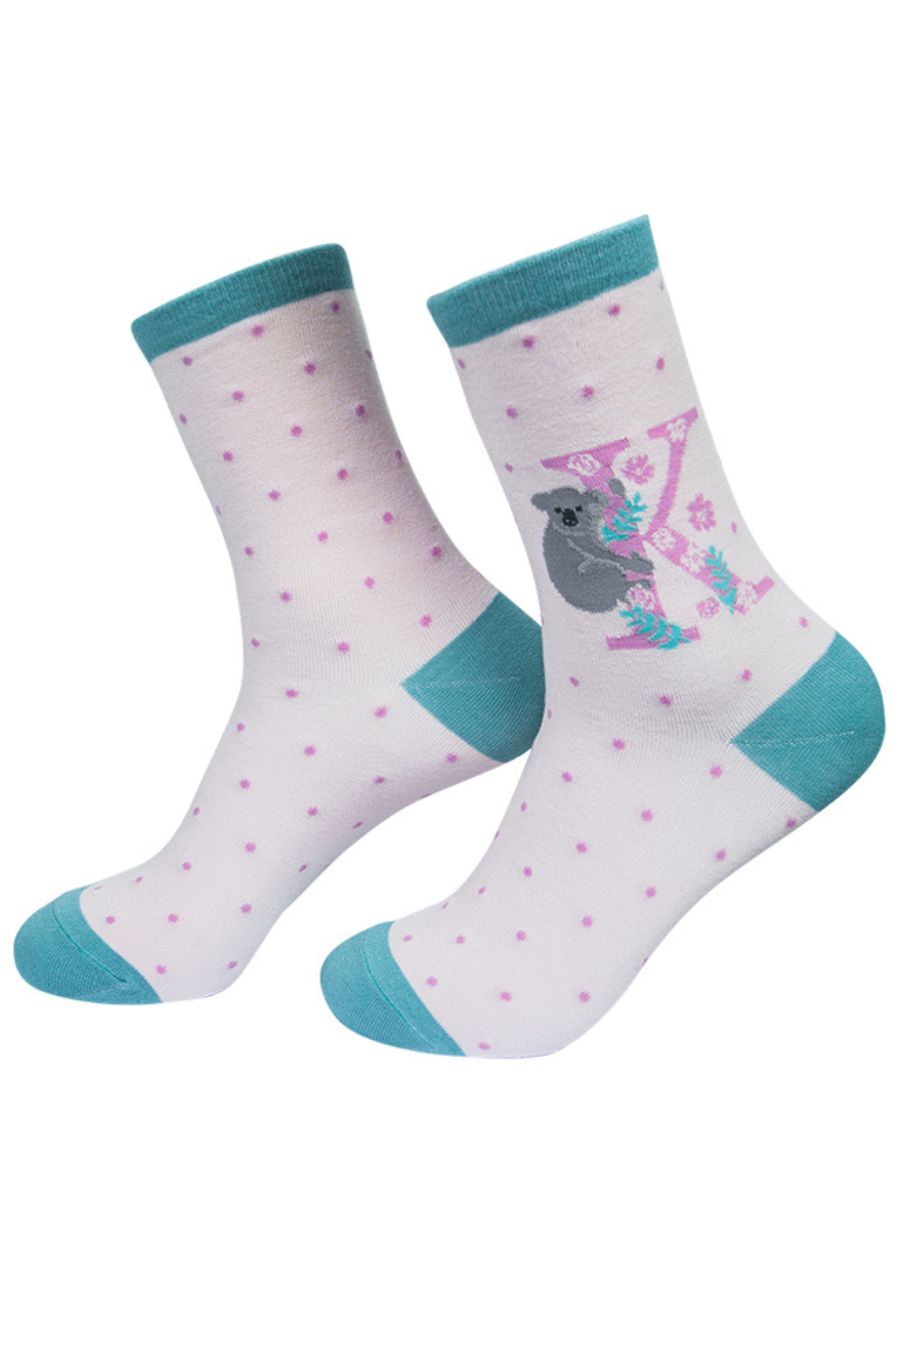 light pink socks with turquoise trim, heel and cuff  a large letter k, a koala and a floral pattern on the ankle